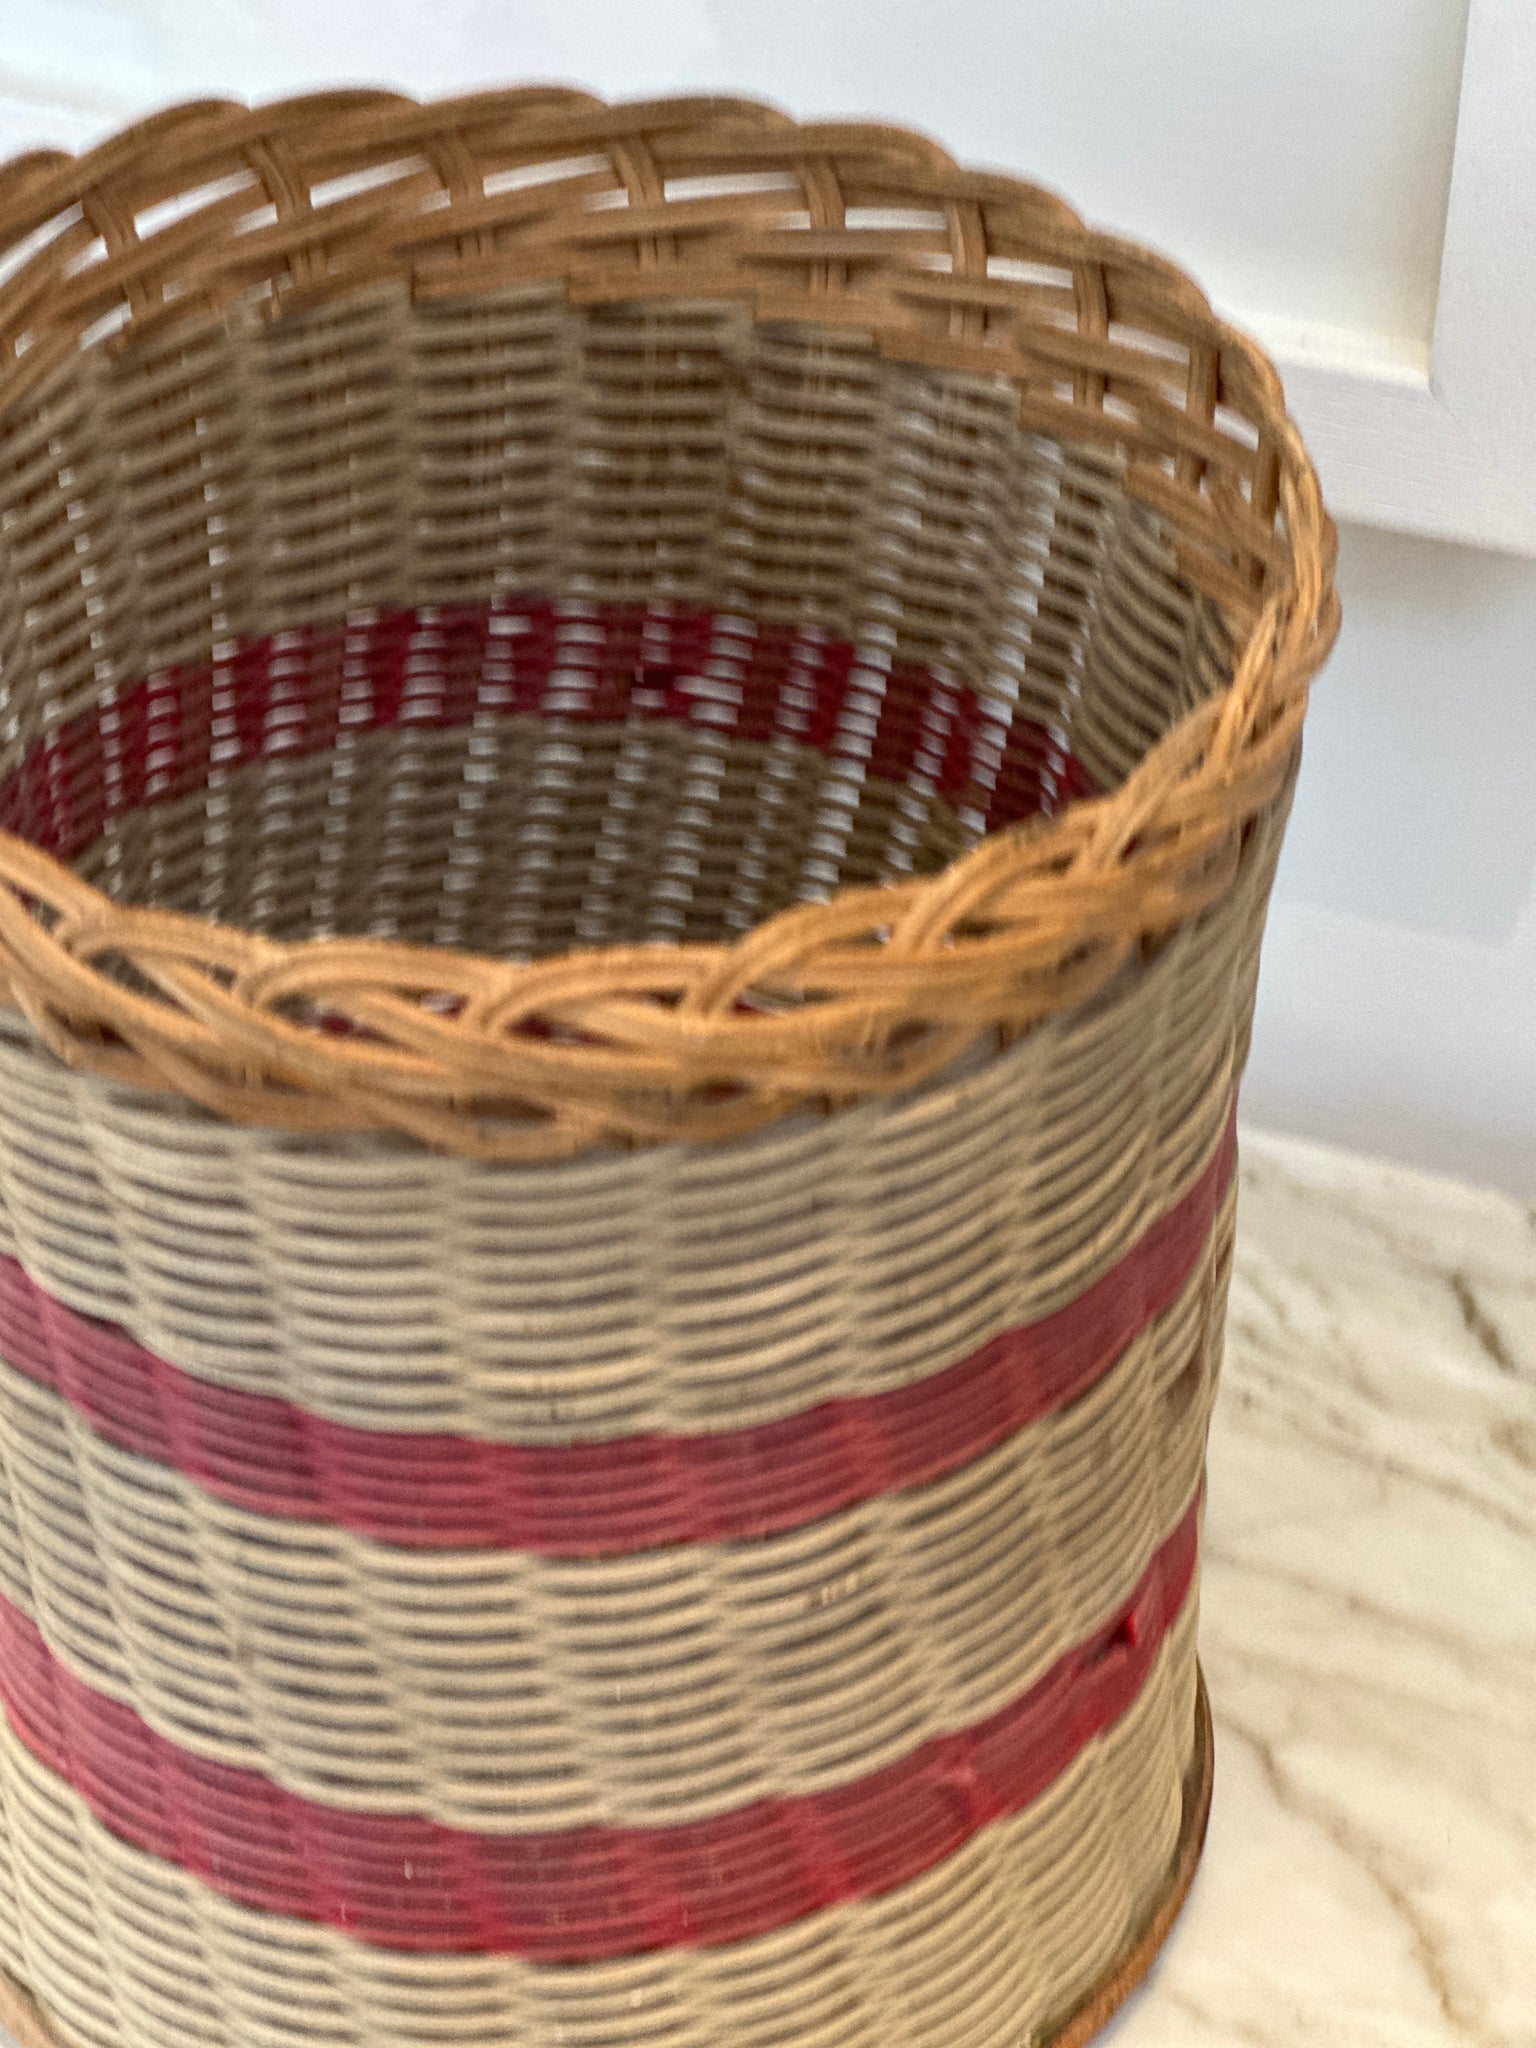 Vintage Wicker Planter or Bin with red accents